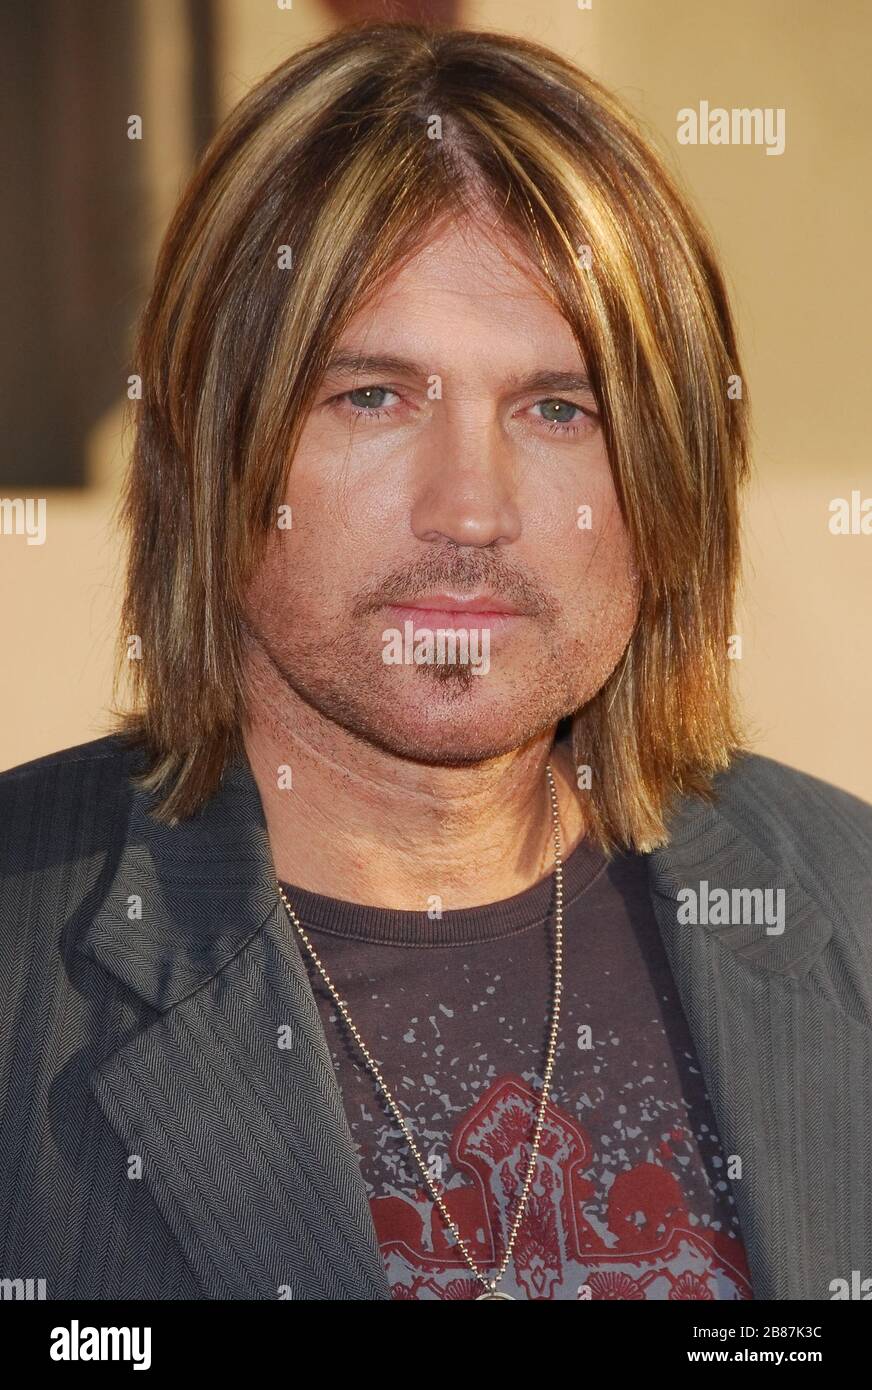 Billy Ray Cyrus at the 34th Annual American Music Awards held at the Shrine Auditorium in Los Angeles, CA. The event took place on Tuesday, November 21, 2006.  Photo by: SBM / PictureLux - File Reference # 33984-9528SBMPLX Stock Photo